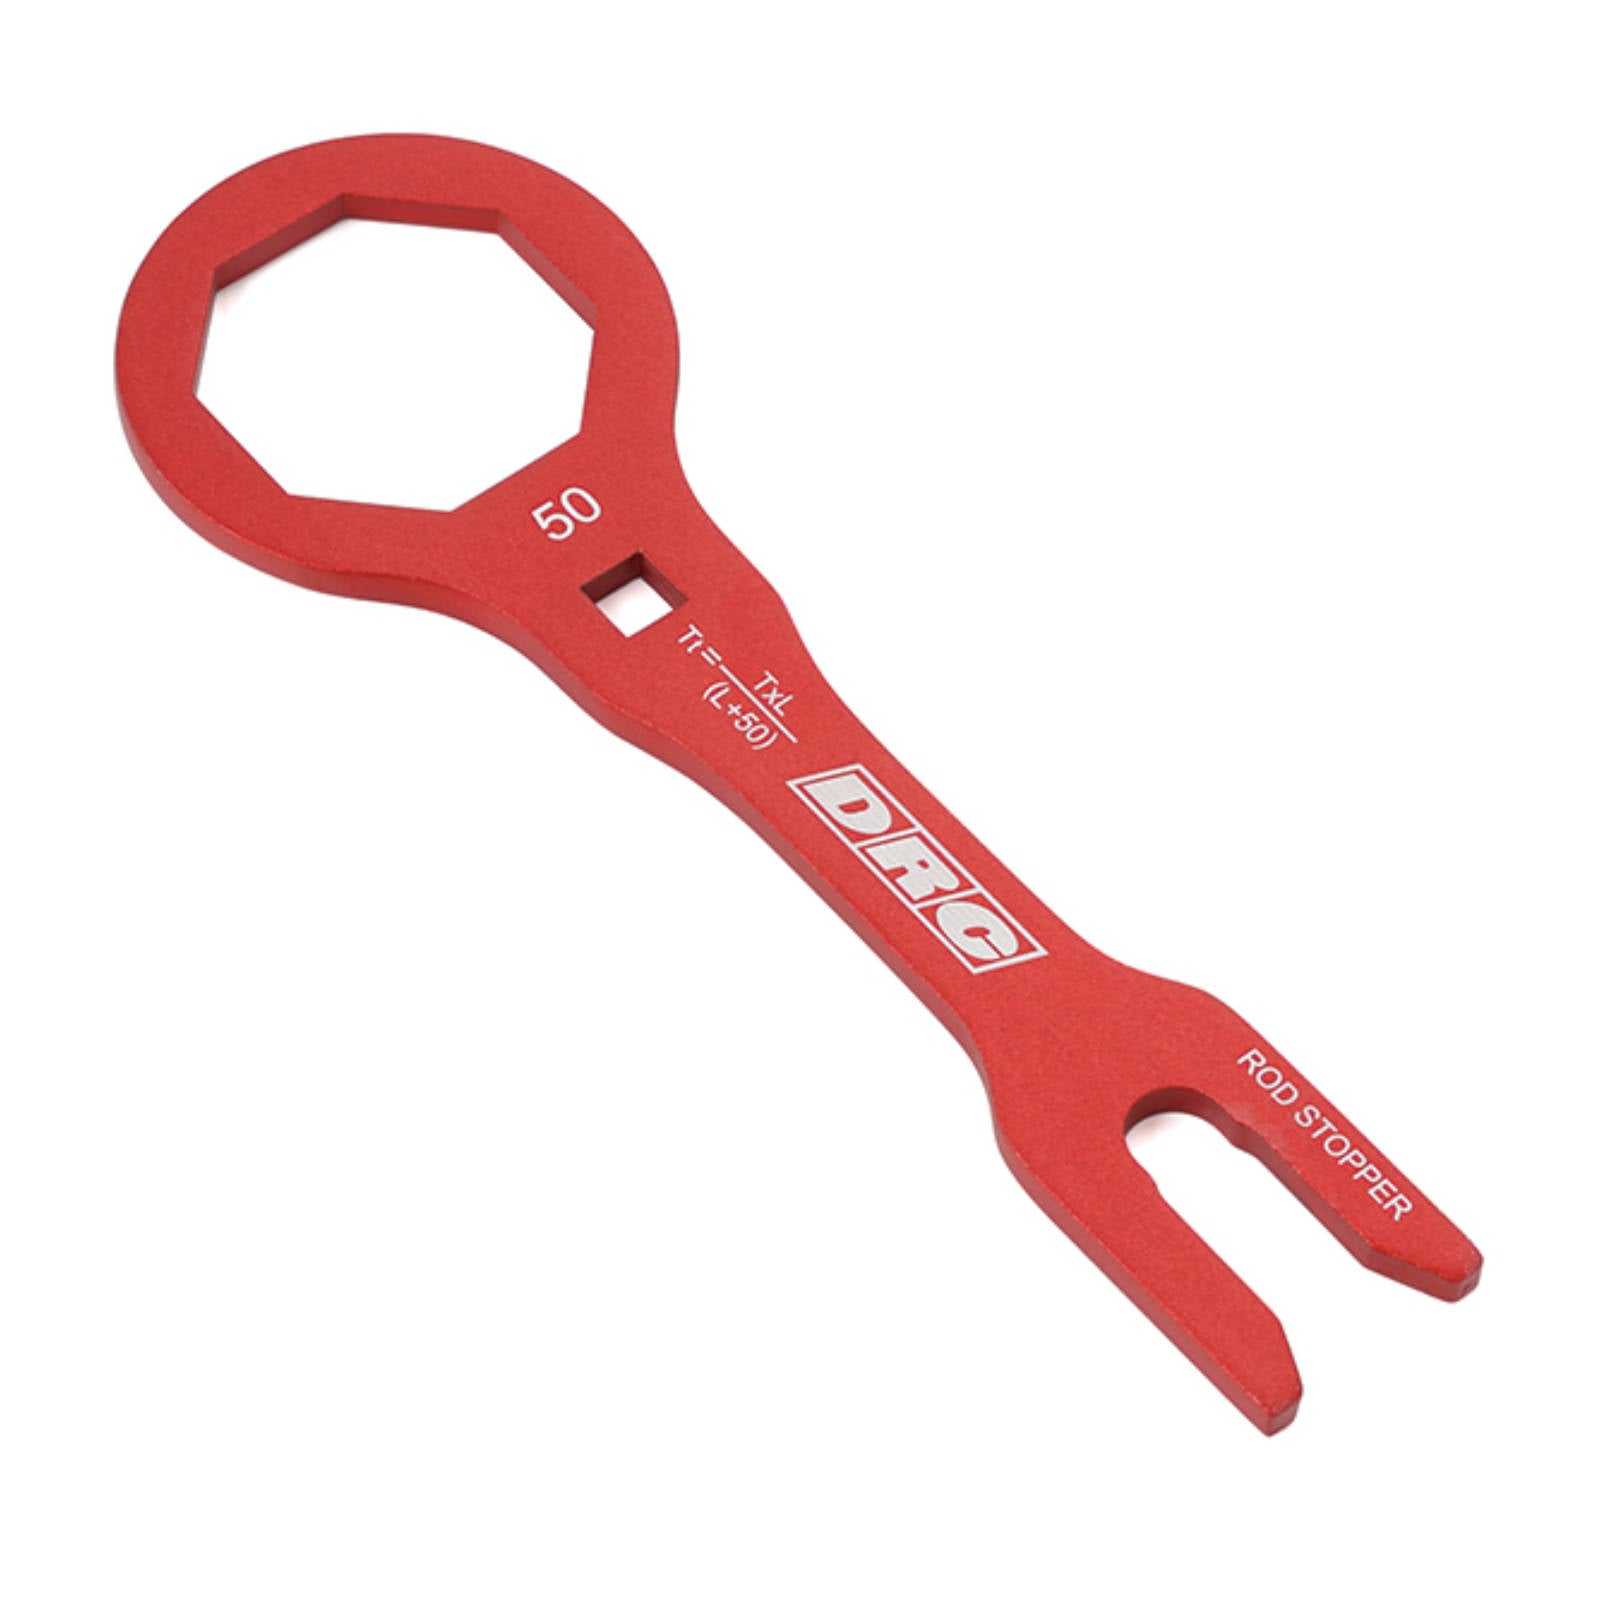 DRC, DRC PRO FORK CAP WRENCH SHOWA 50MM RED